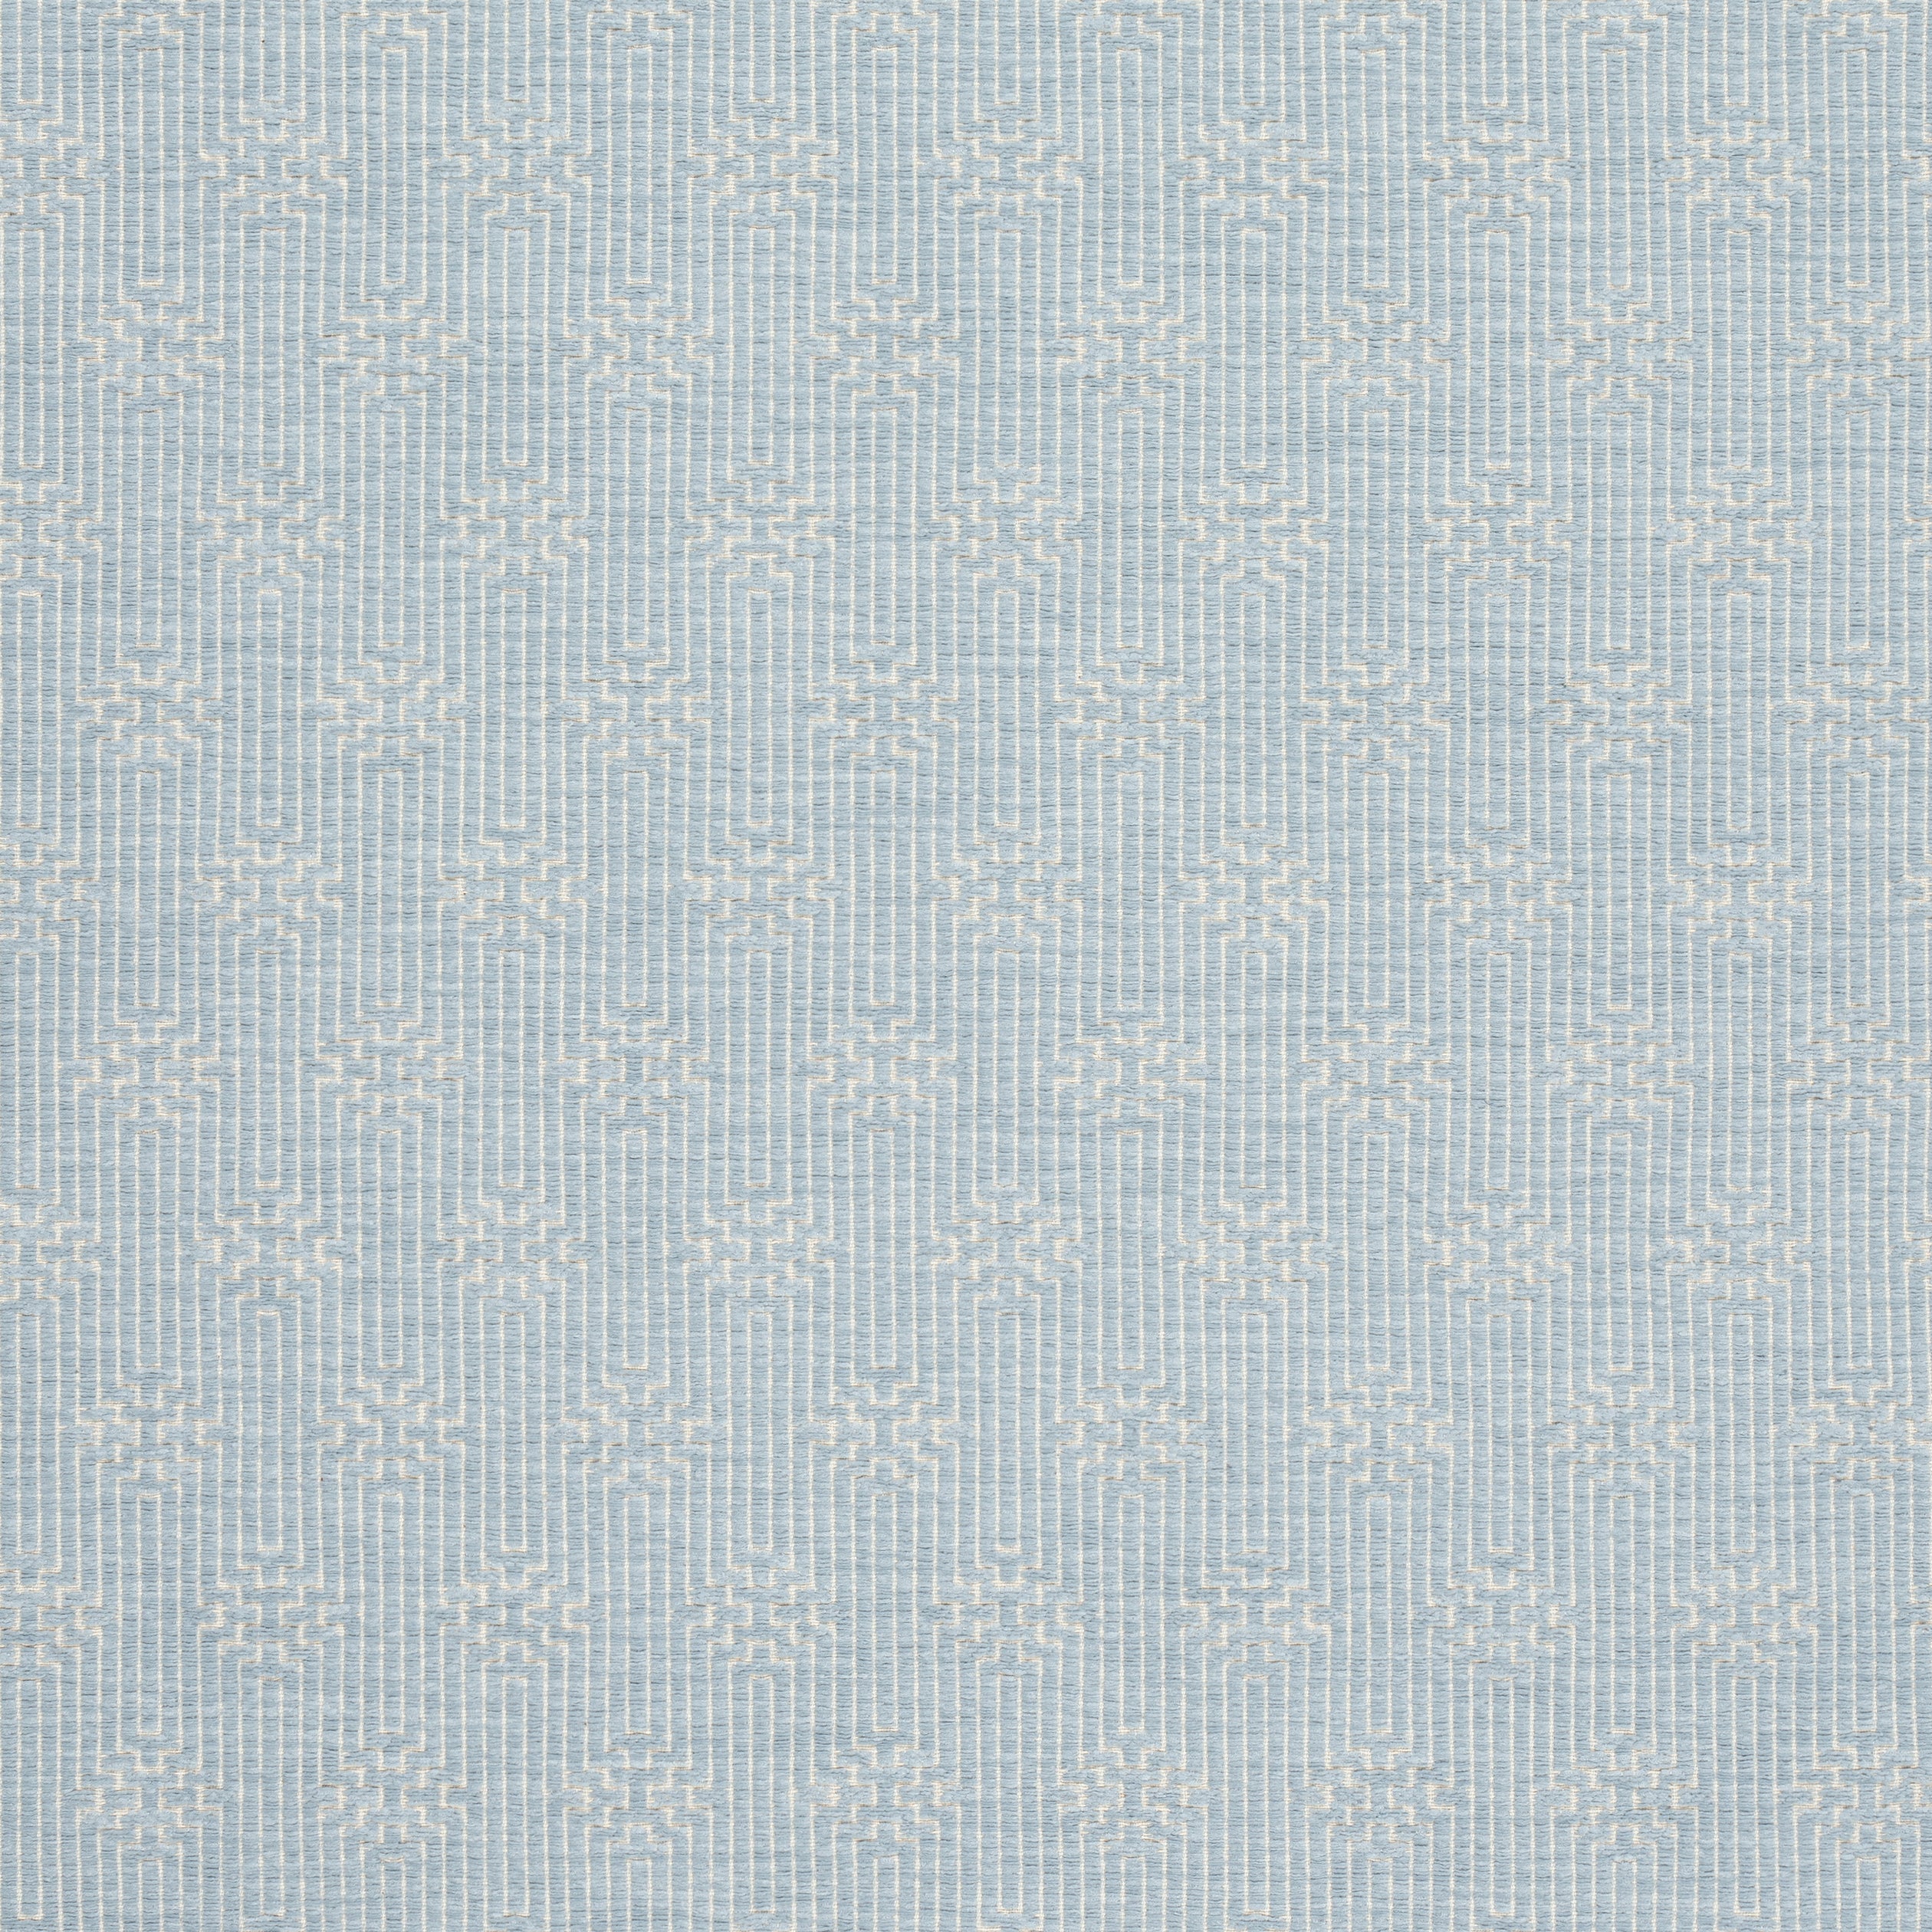 Crete fabric in powder color - pattern number W74209 - by Thibaut in the Passage collection